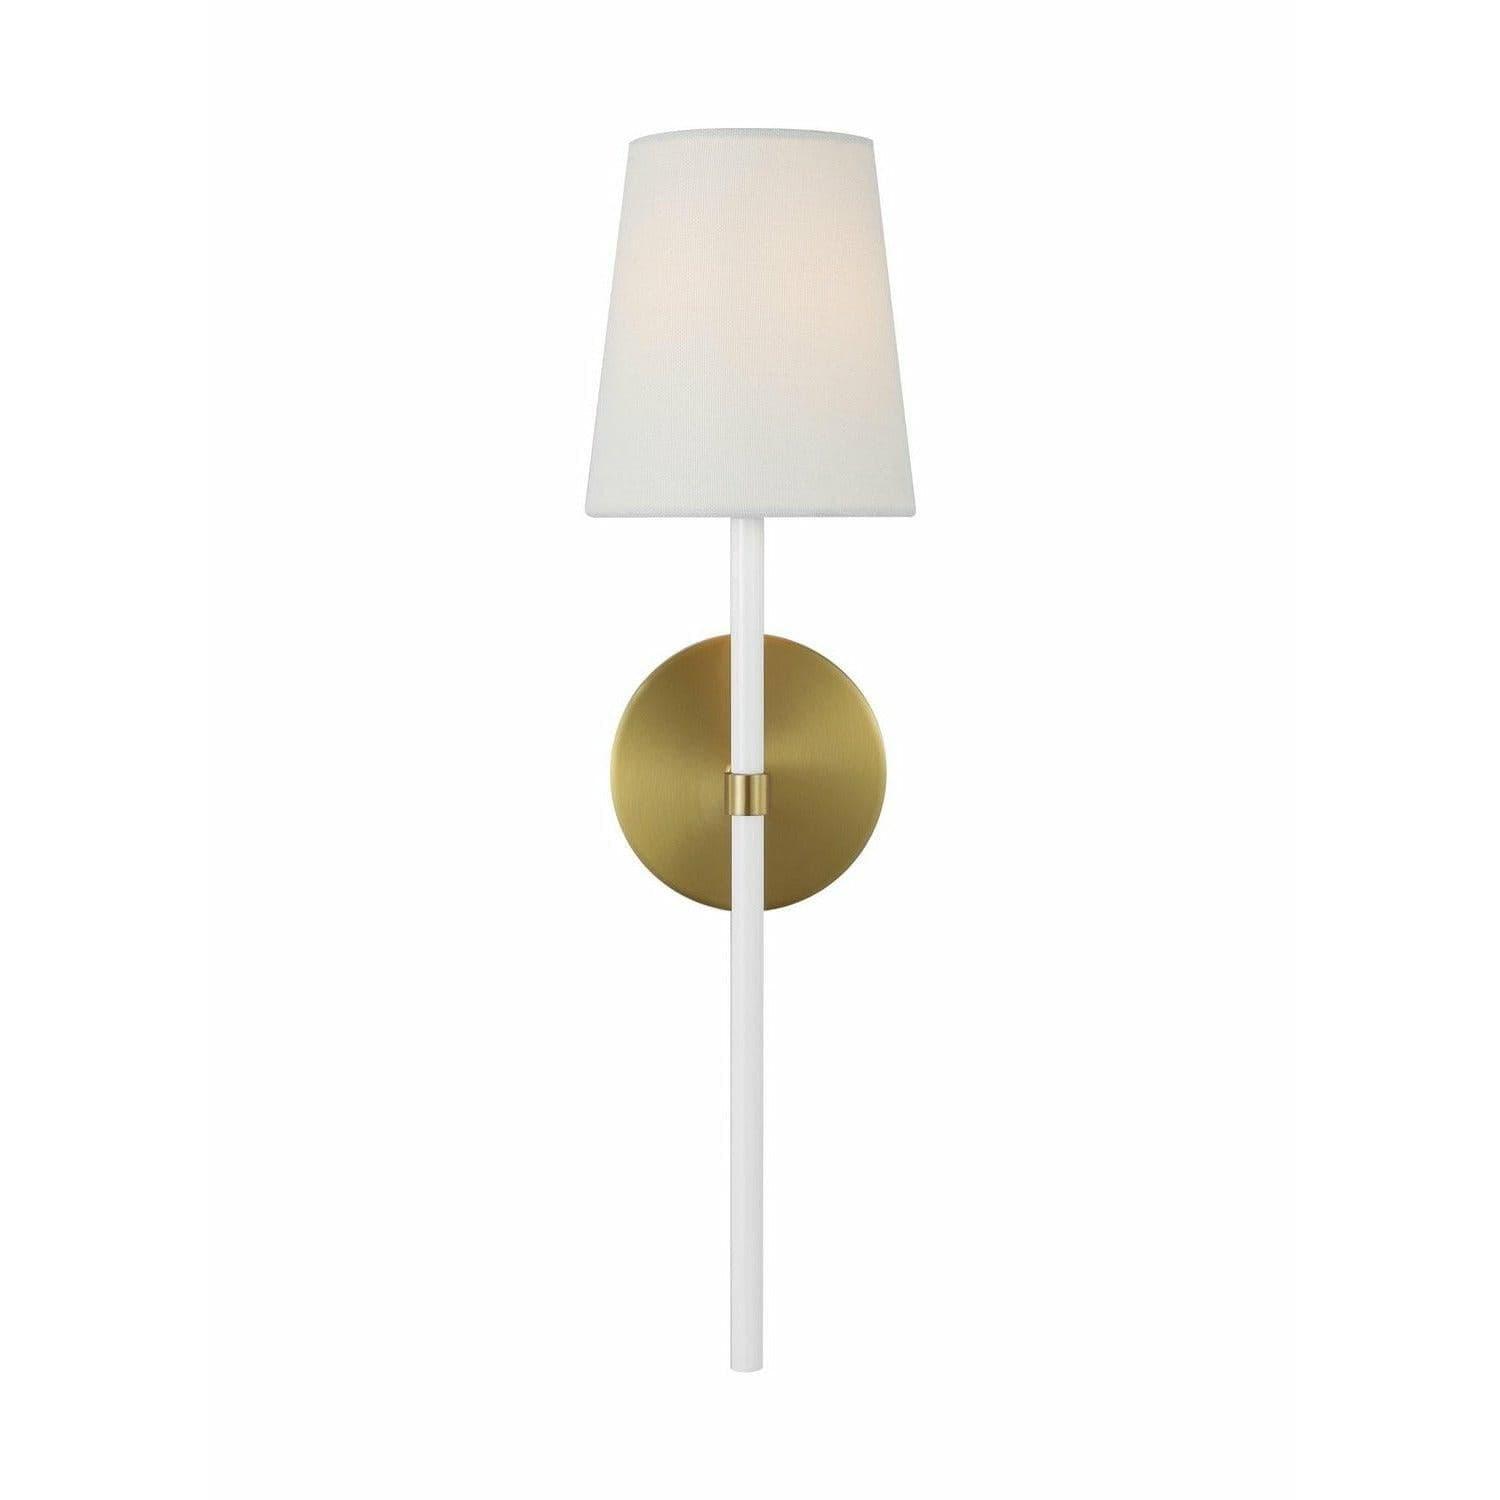 Visual Comfort Studio Collection - Monroe Tail Wall Sconce - KSW1091BBSGW | Montreal Lighting & Hardware